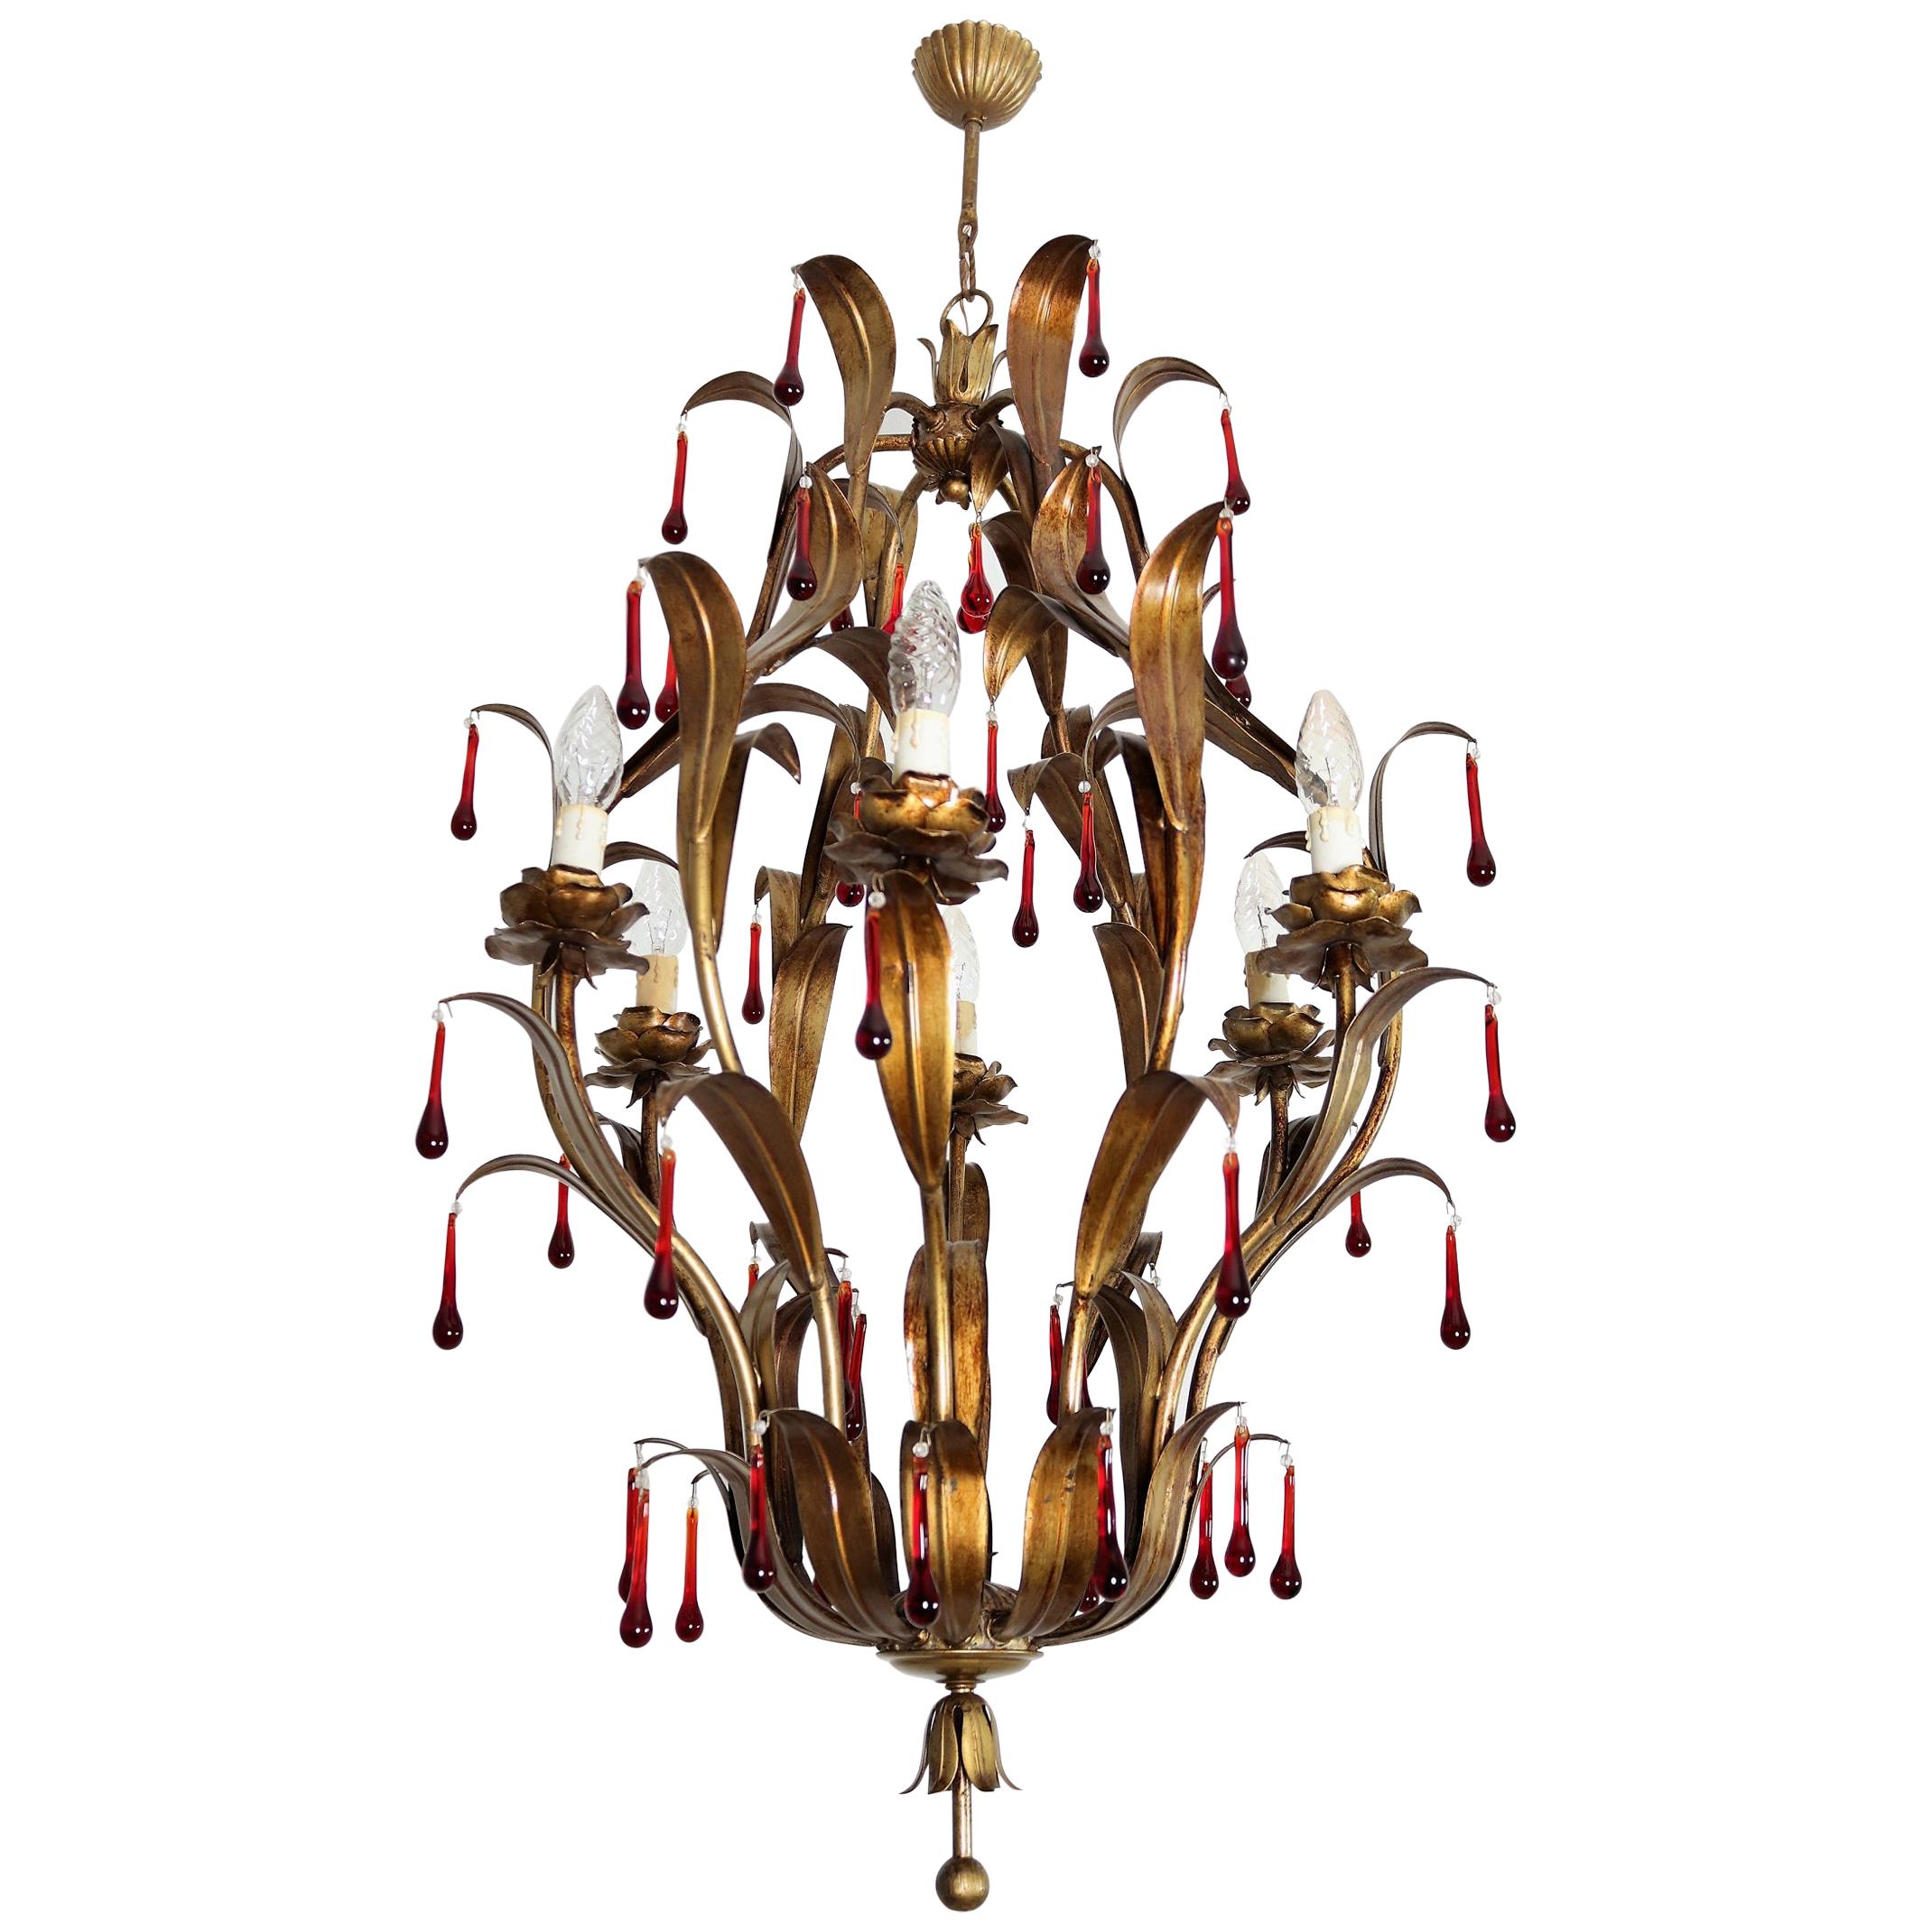 Italian Midcentury Gilt Florentine Chandelier with Red Murano Glass Drops, 1970s For Sale